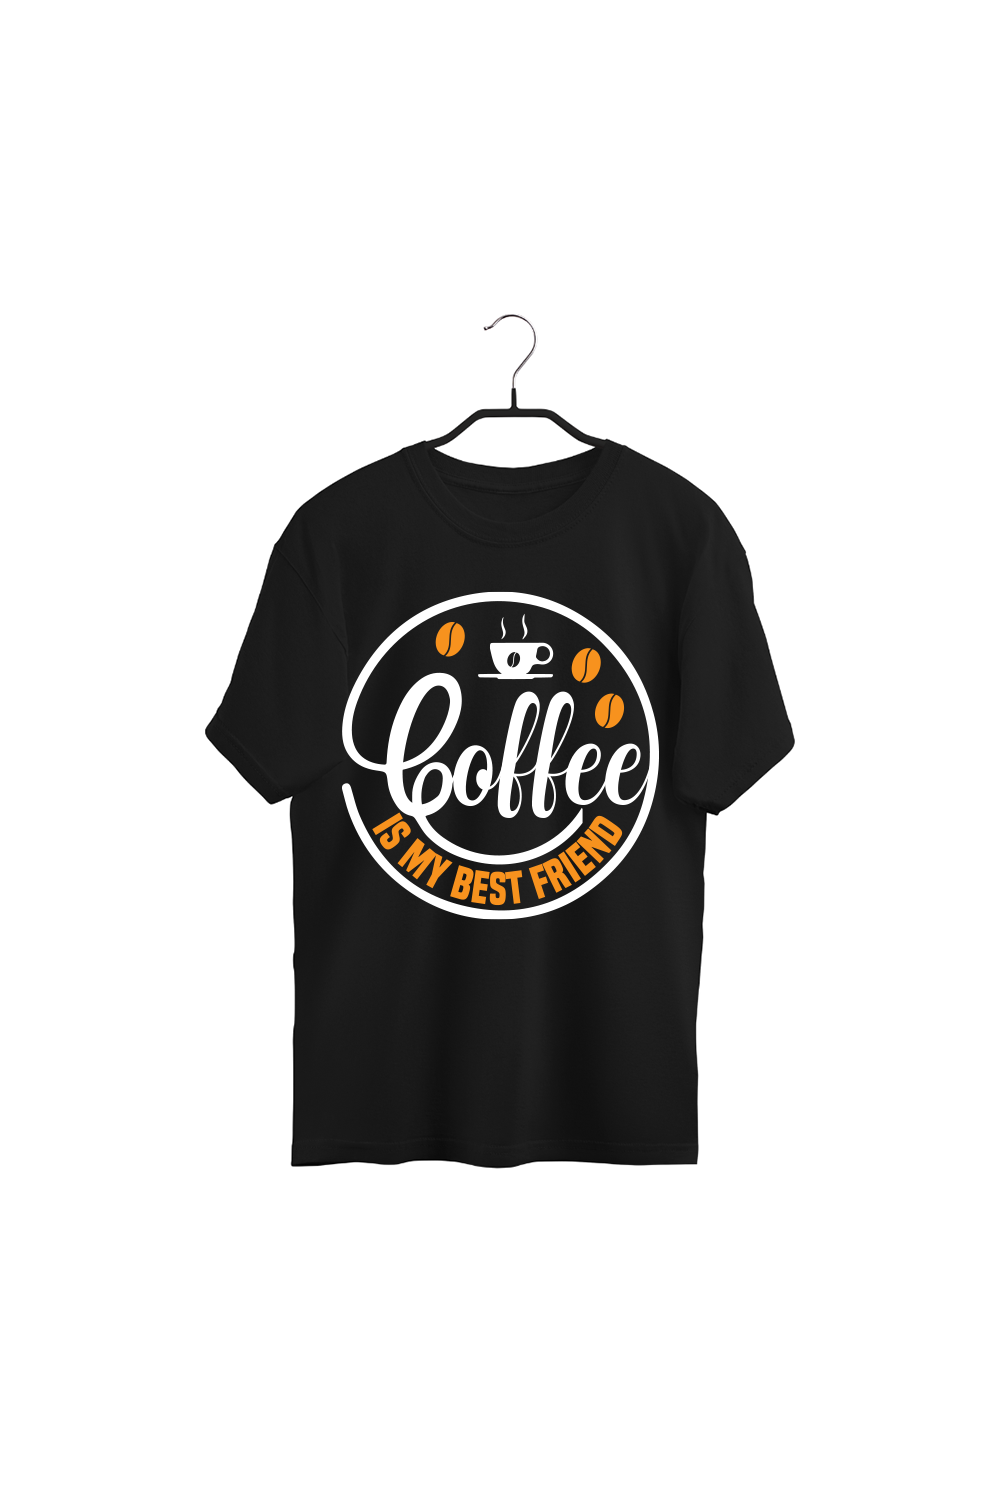 coffee T-Shirt Design pinterest preview image.